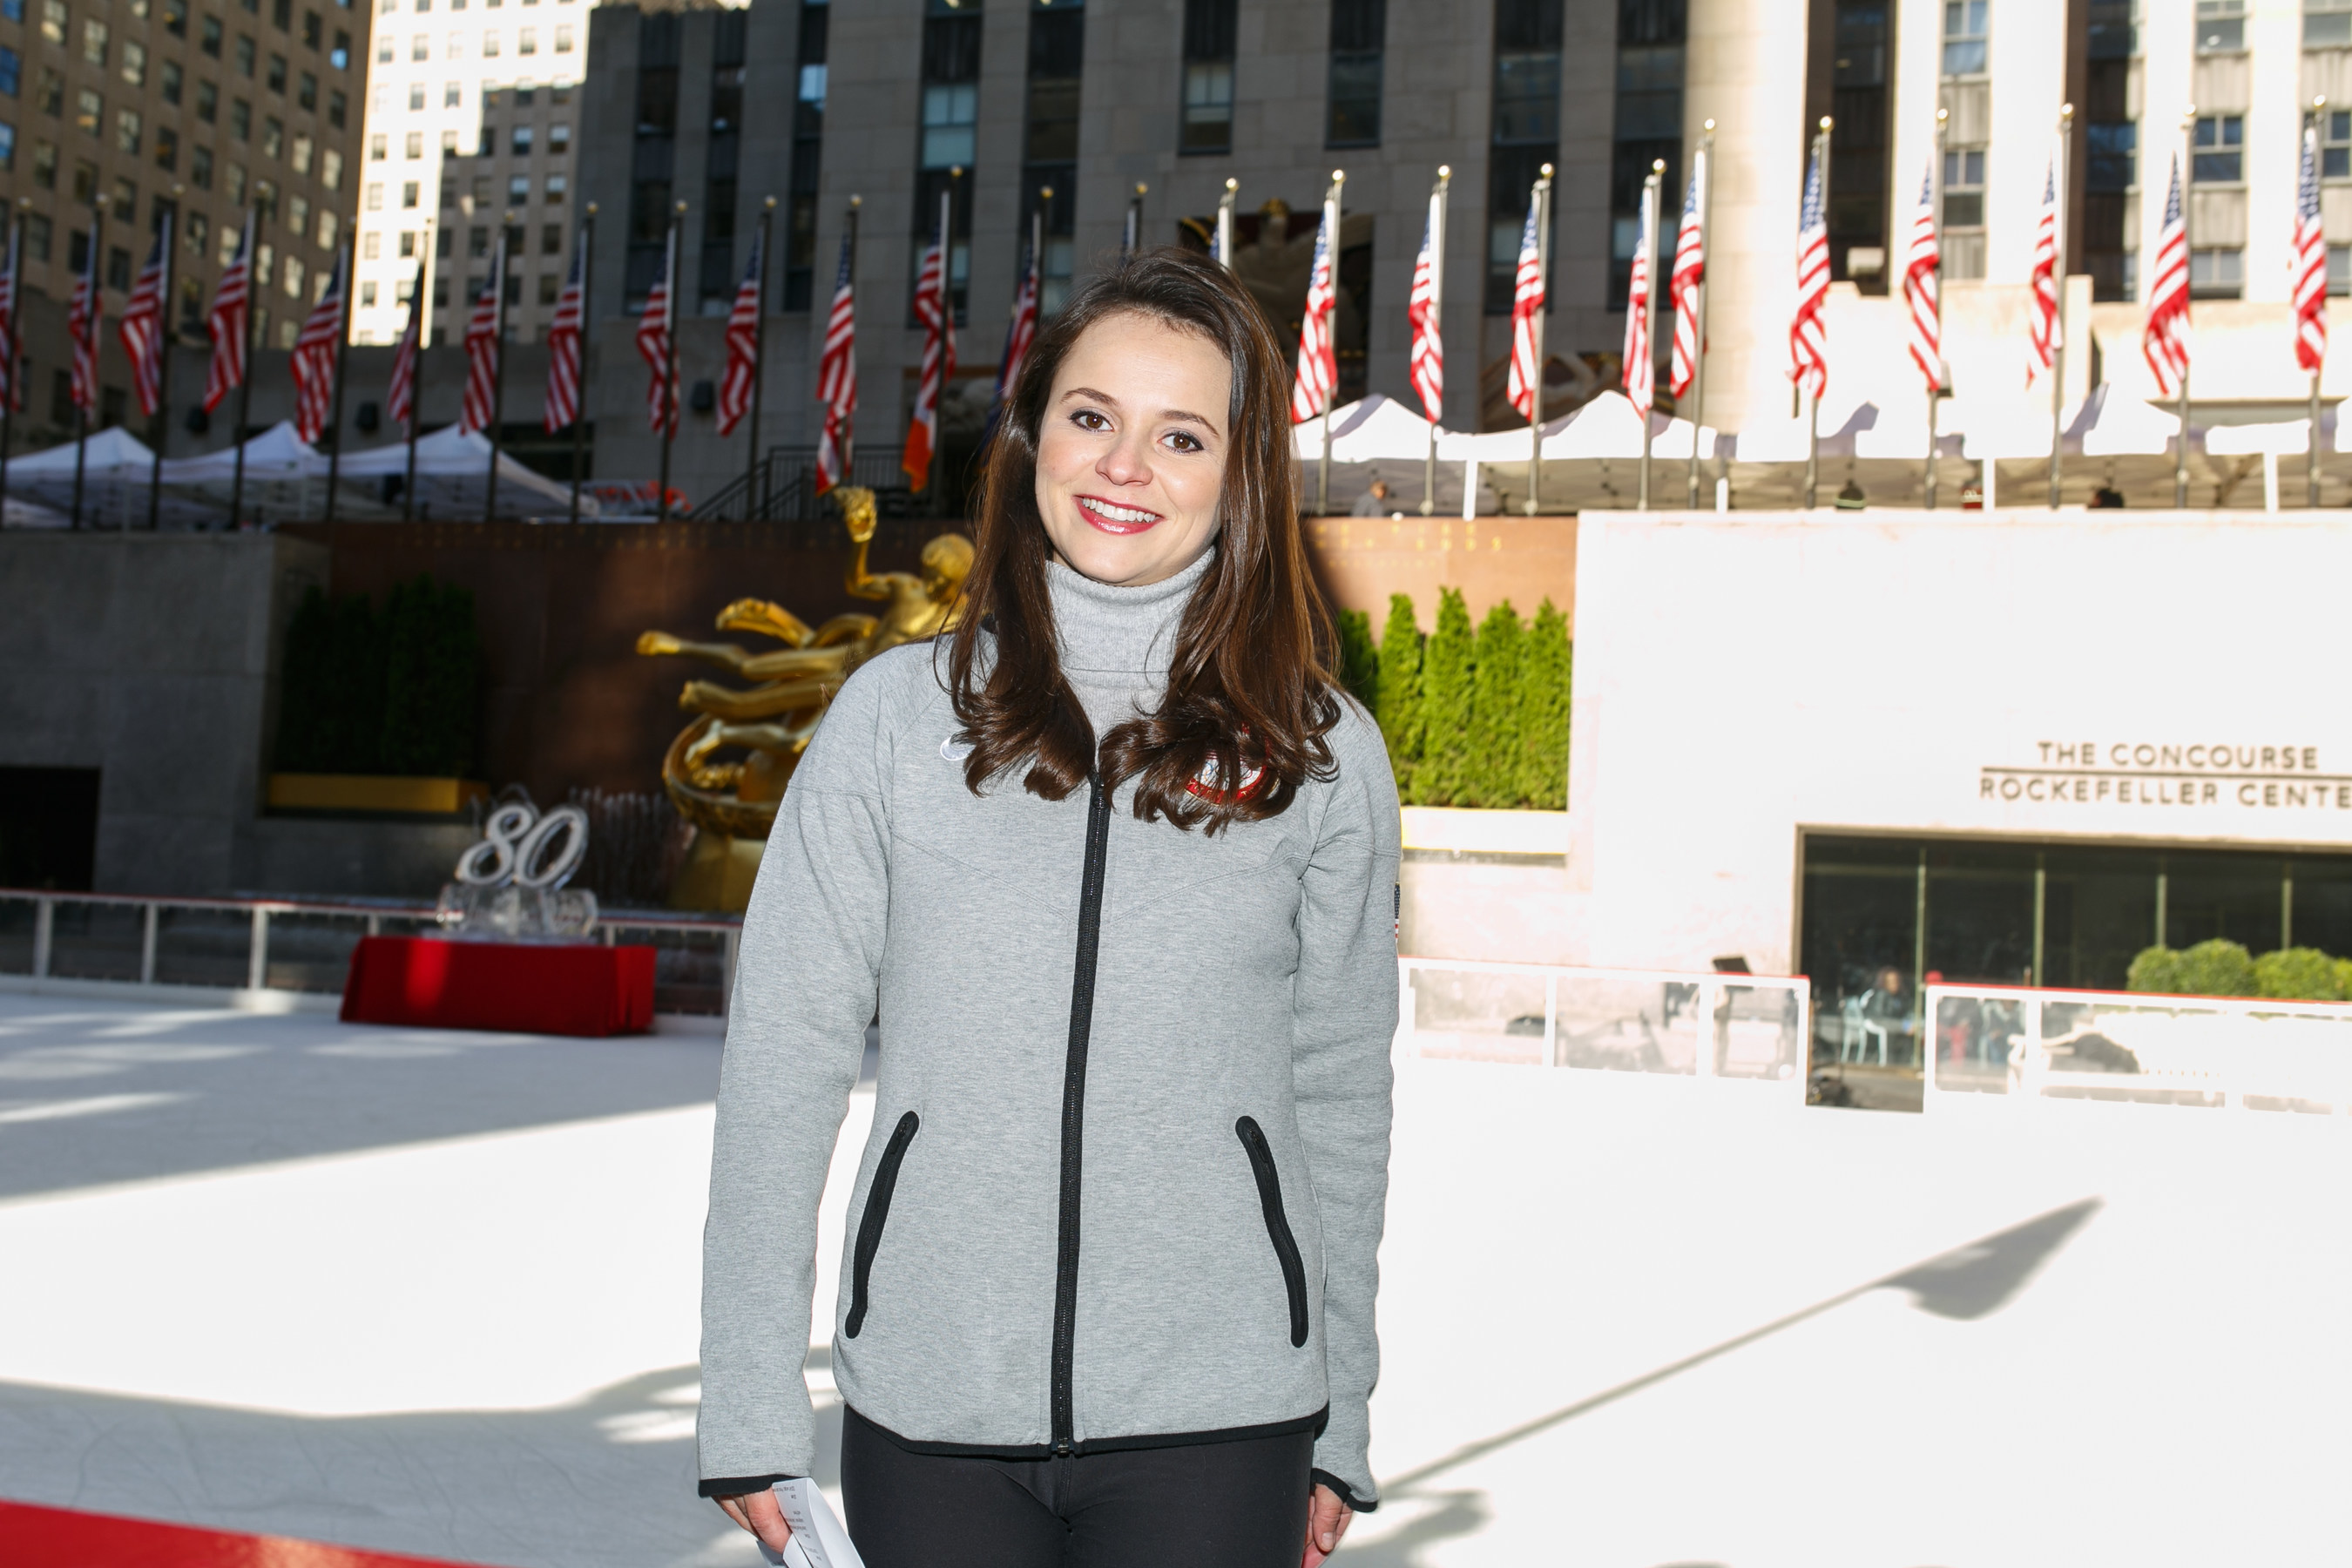 Olympic Silver Medalist Sasha Cohen hosts the opening of The Rink at Rockefeller Center on October 11, 2016. The Rink is celebrating its 80th anniversary this year, and is now open for the season.